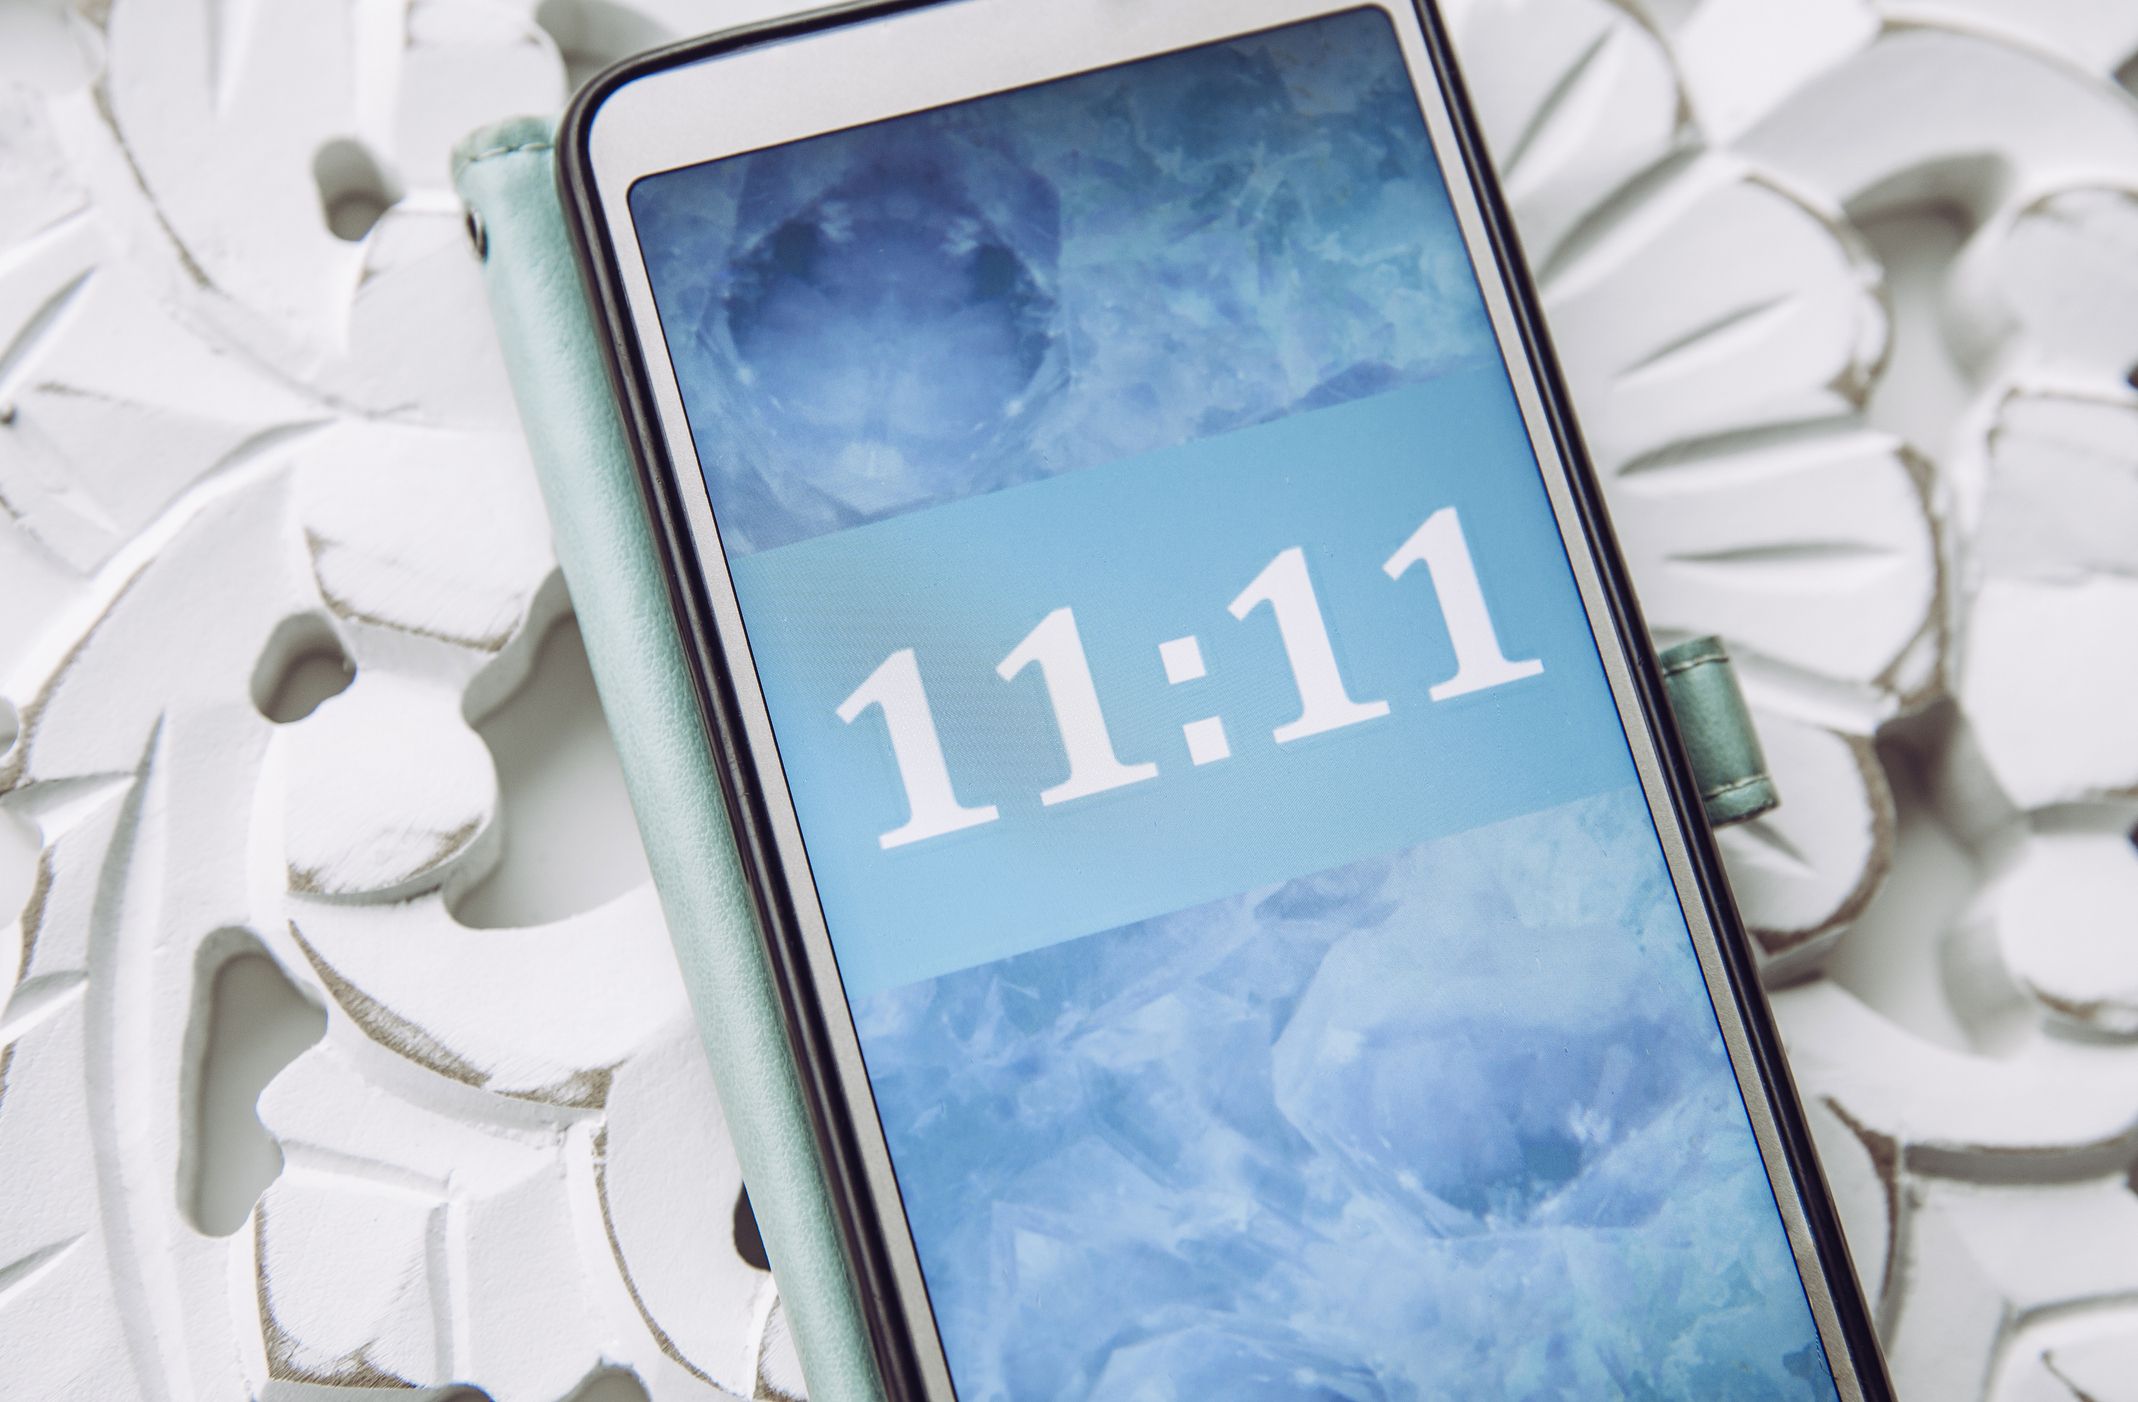 Seeing 11:11? Find out the meaning of this powerful sign from the Universe